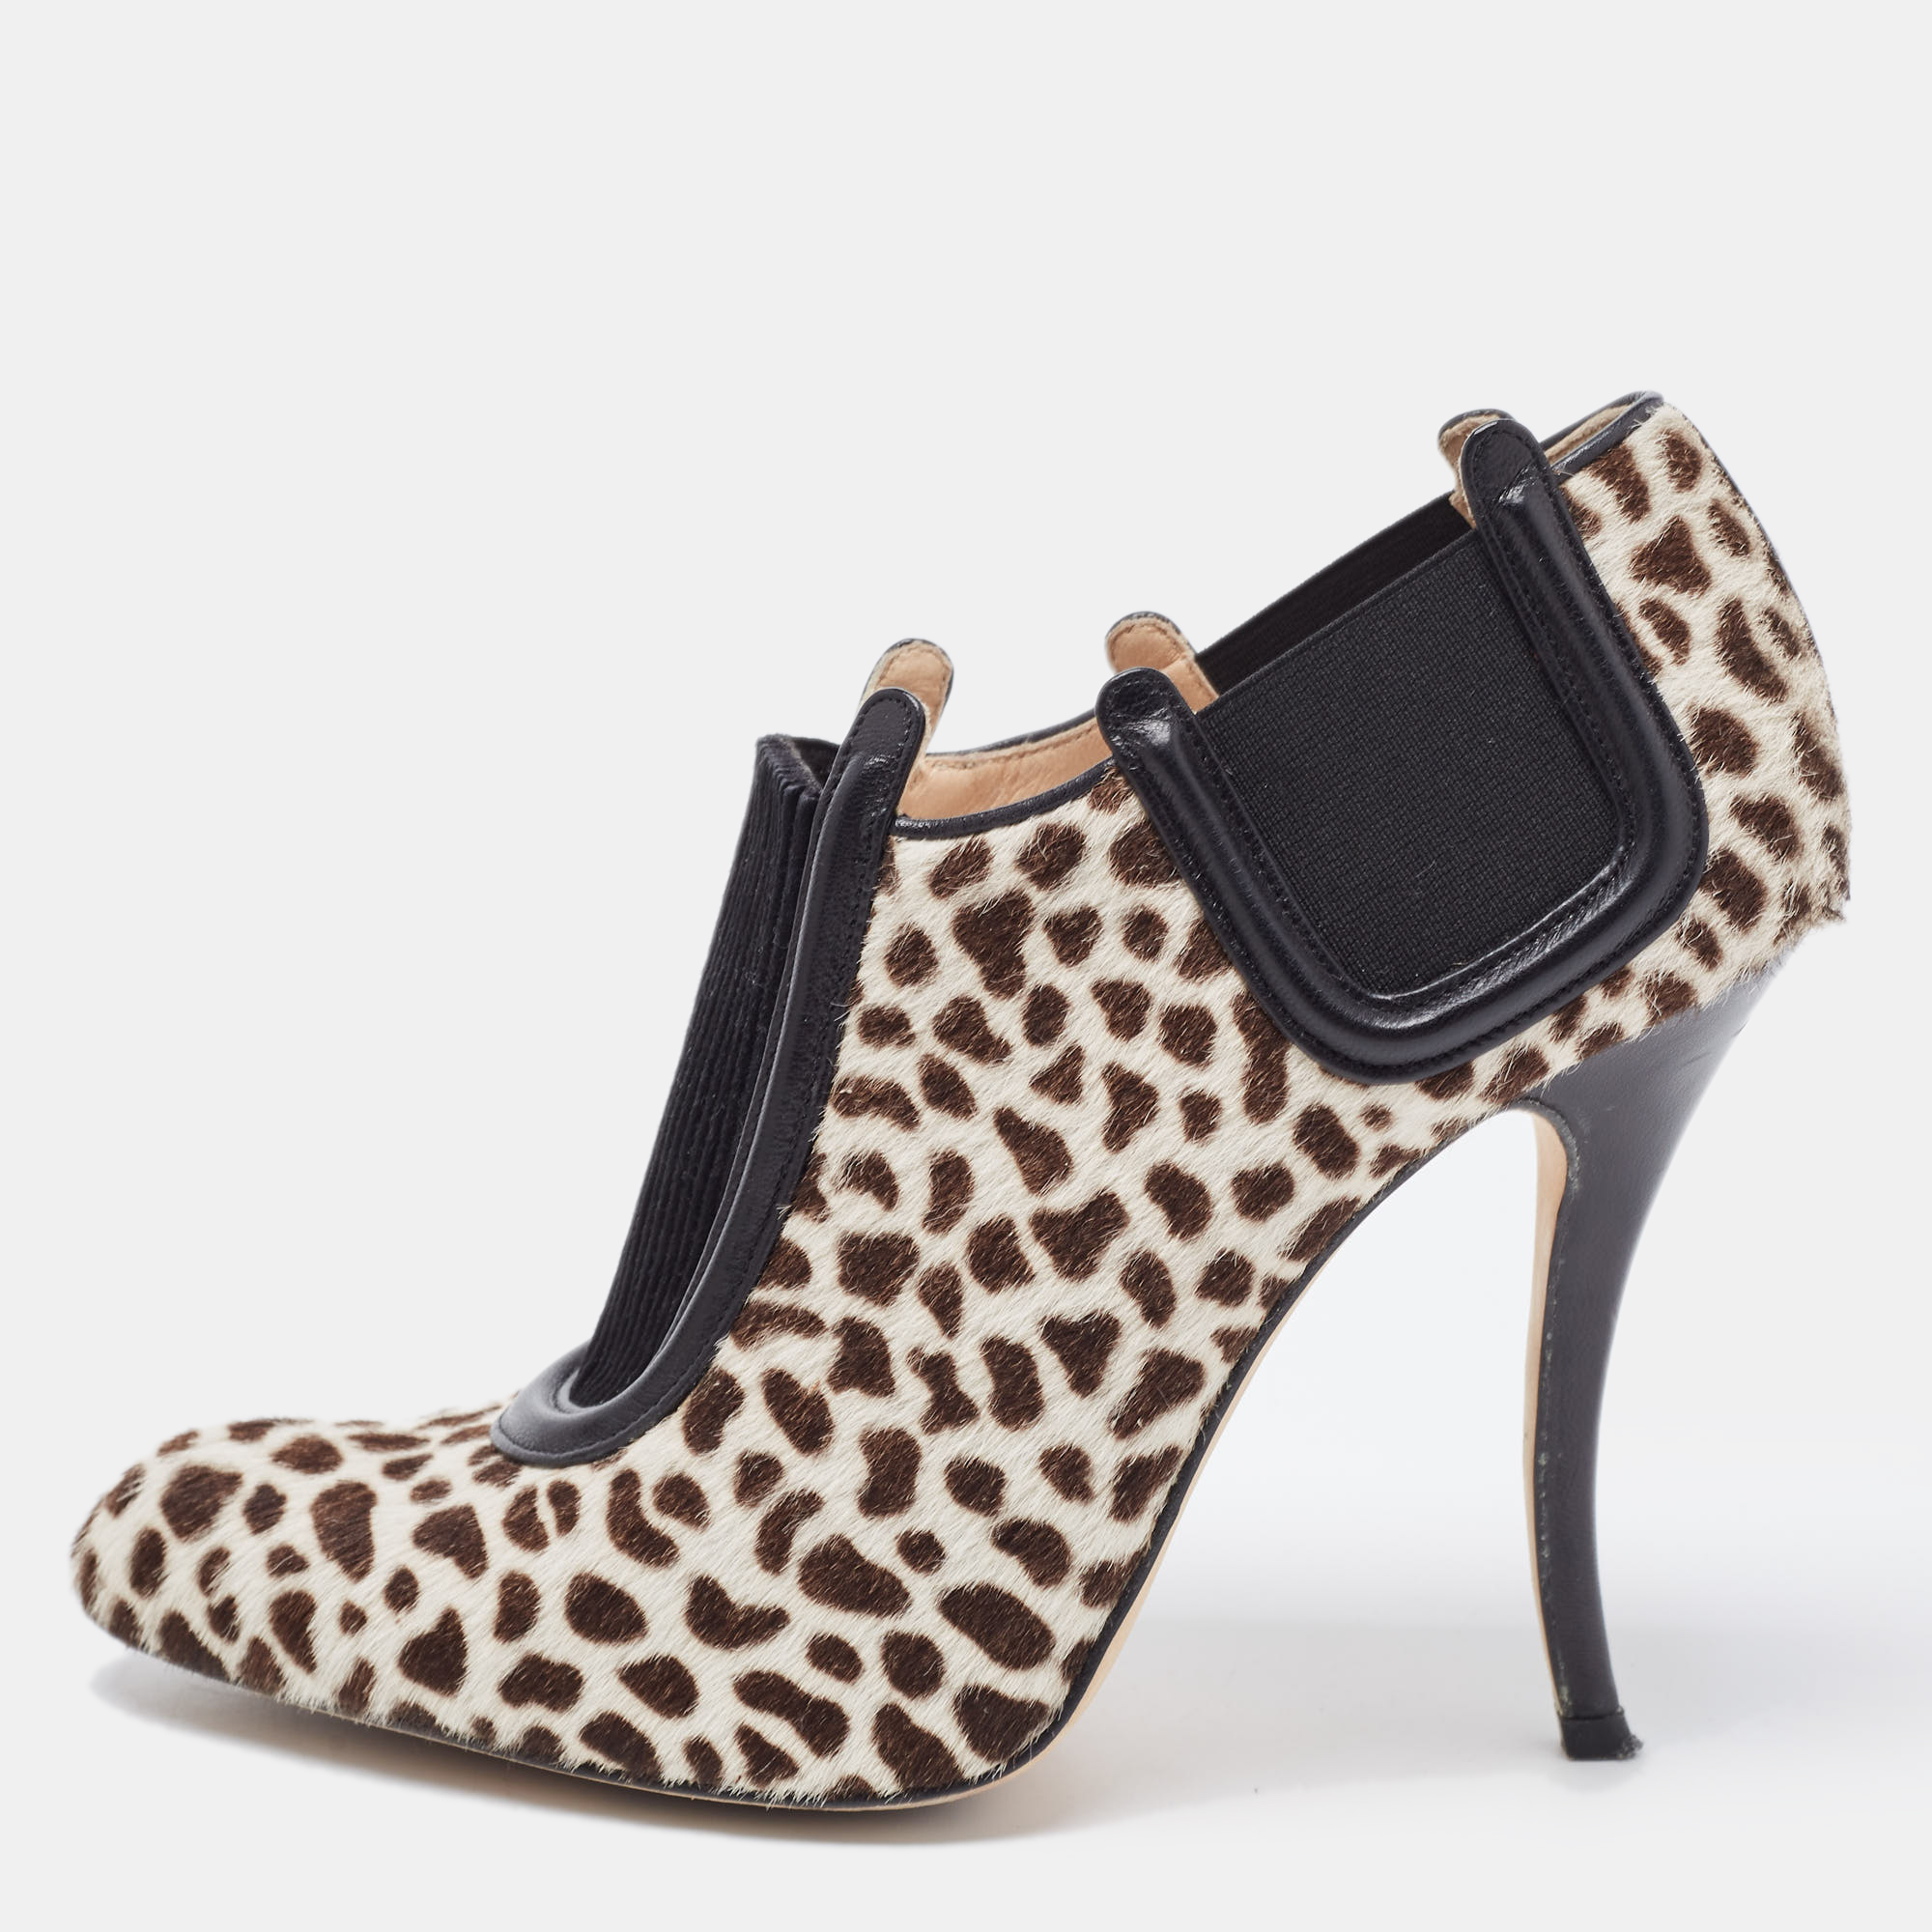 Manolo Blahnik Tricolor Animal Print Calf Hair And Leather Ankle Booties Size 37.5